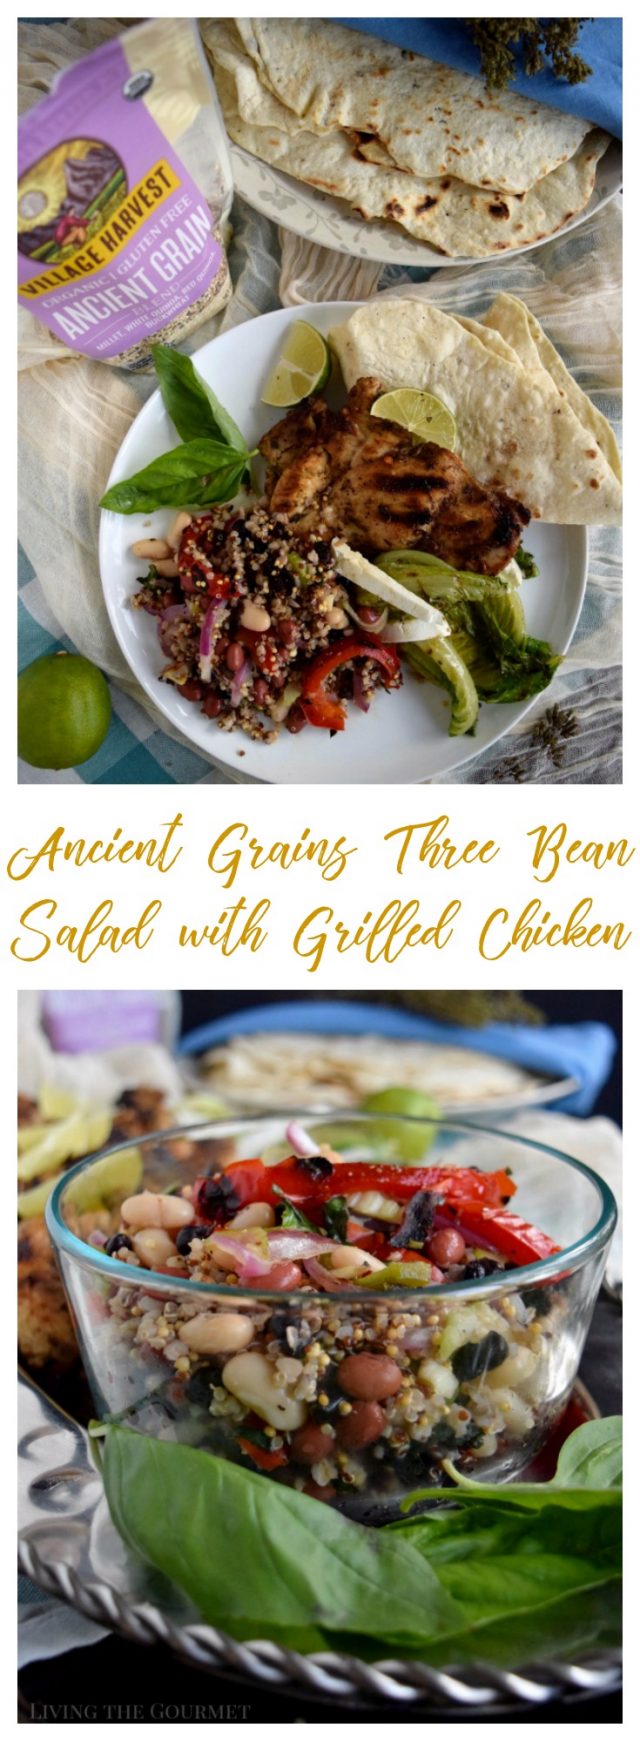 Ancient Grains Three Bean Salad with Grilled Chicken - Living The Gourmet